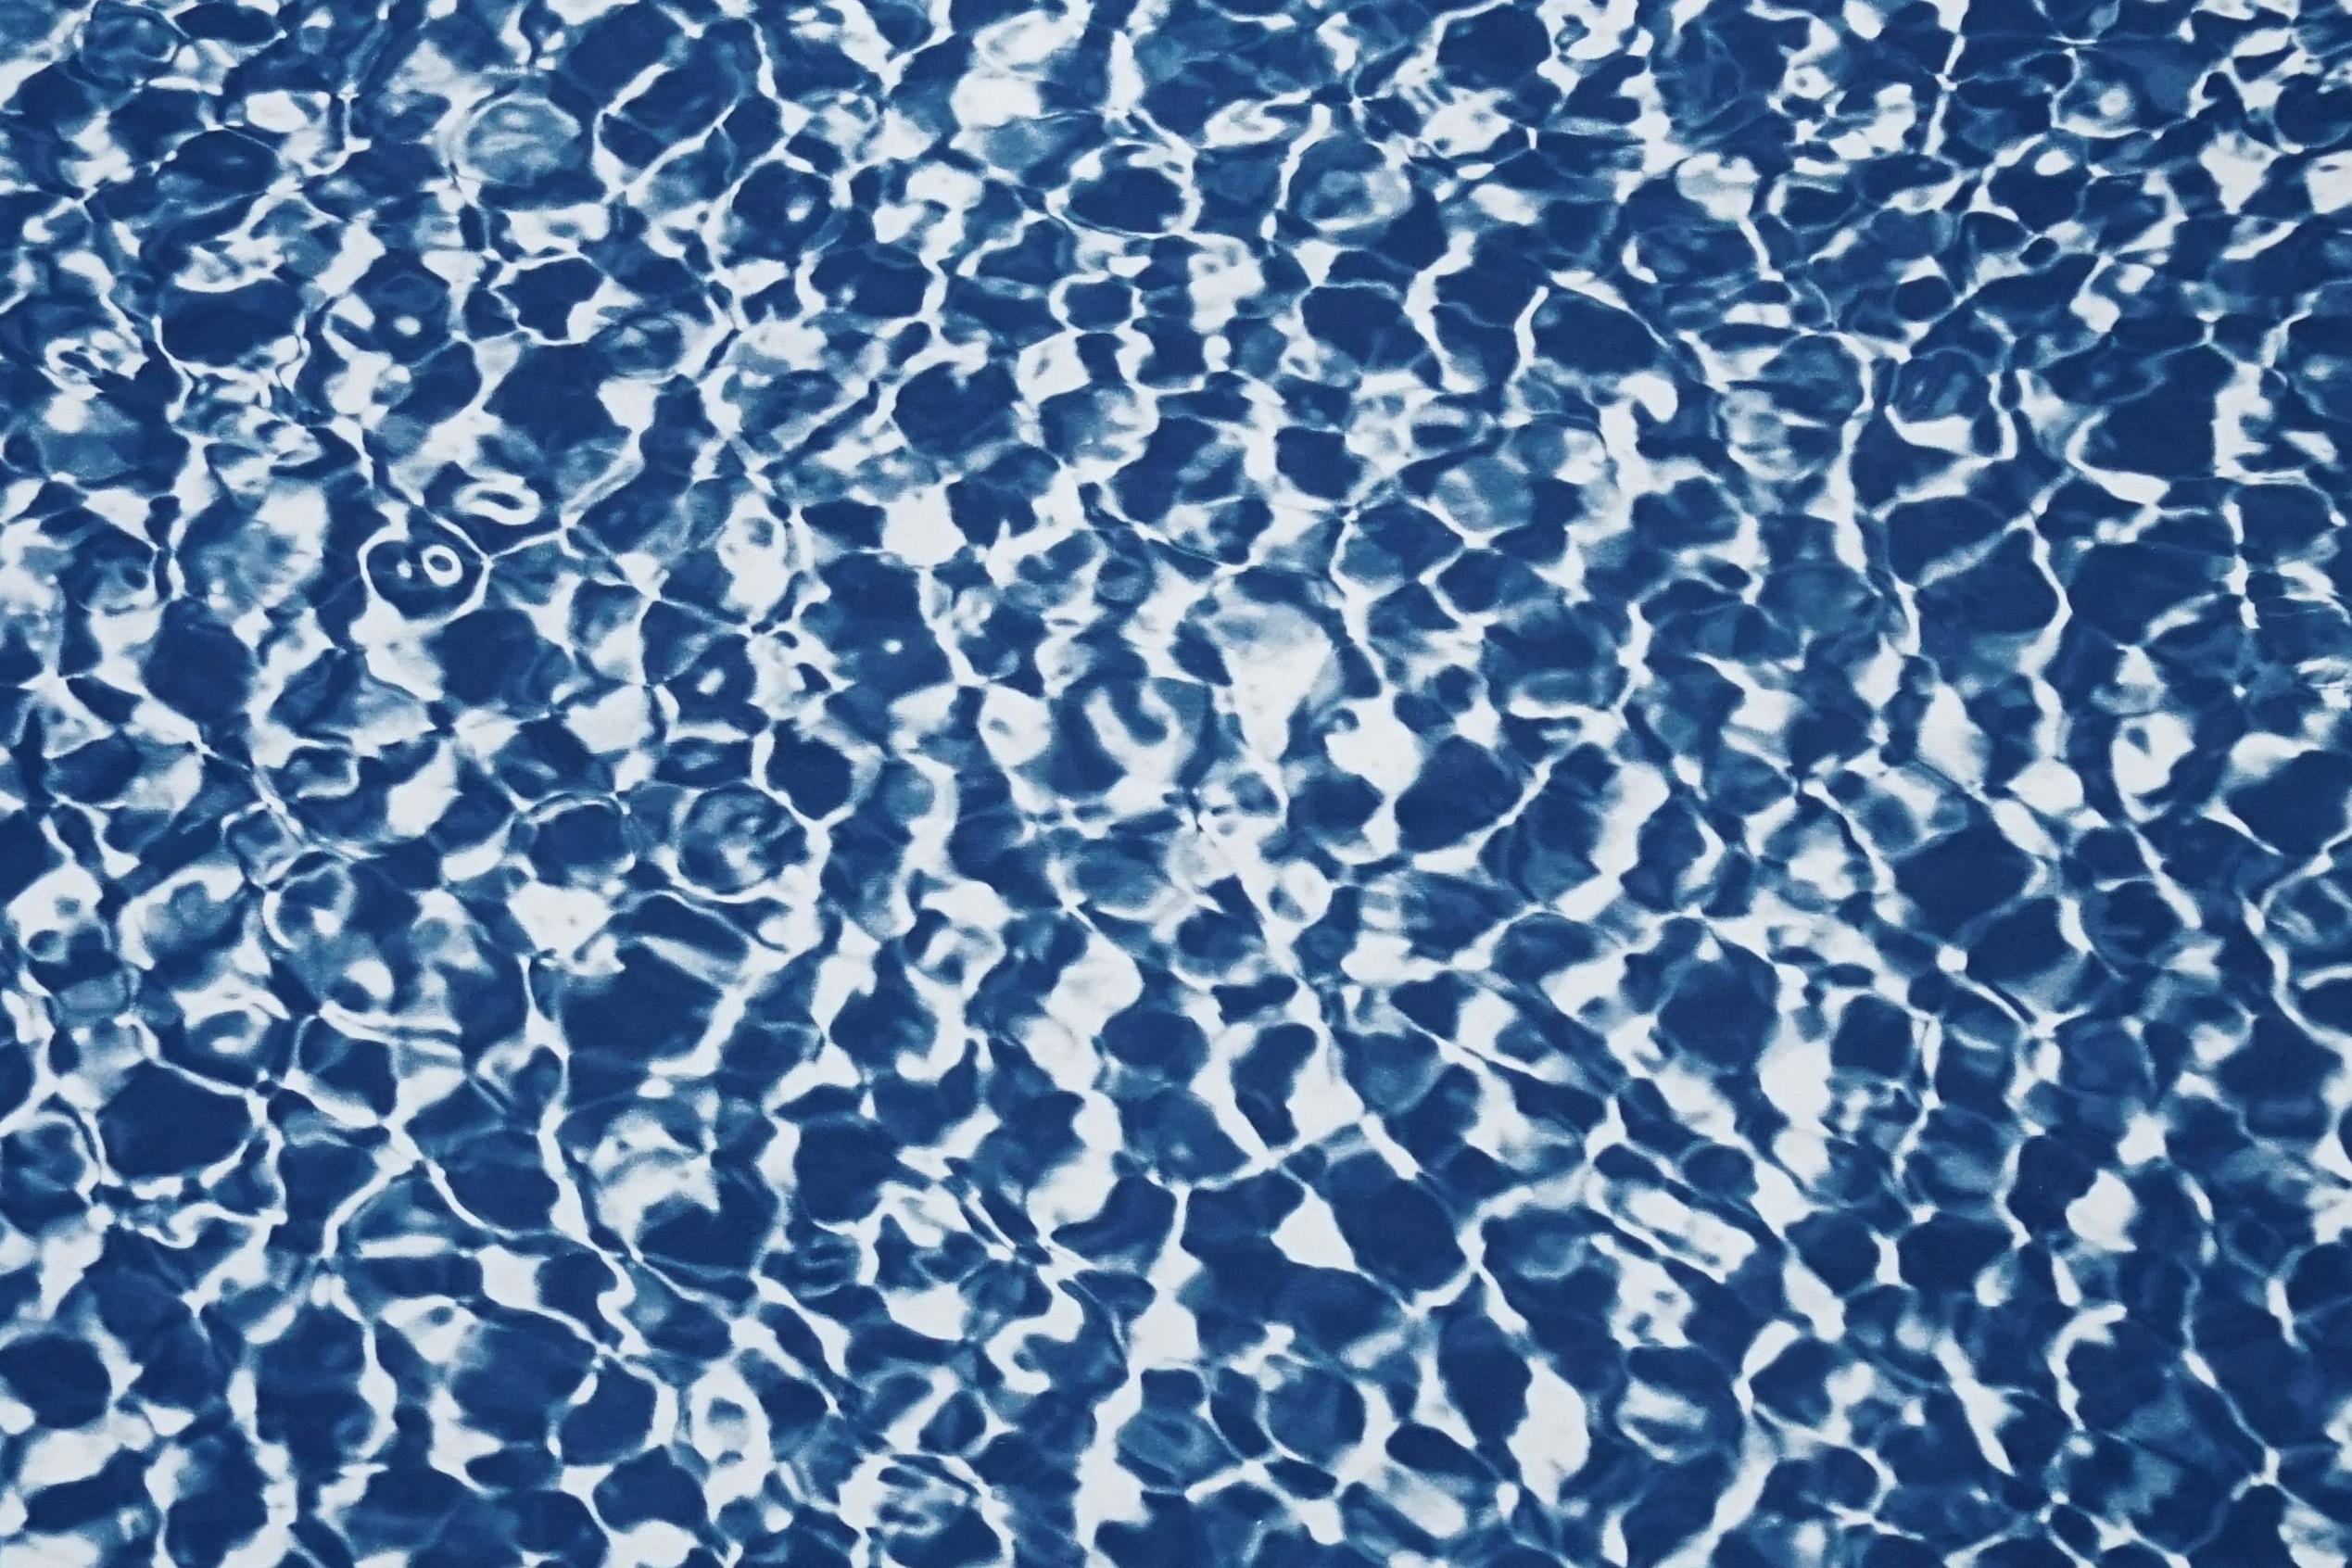 Infinity Pool, Cyanotype on Watercolor Paper, 100x70cm, Blue Abstract Art - Contemporary Photograph by Kind of Cyan